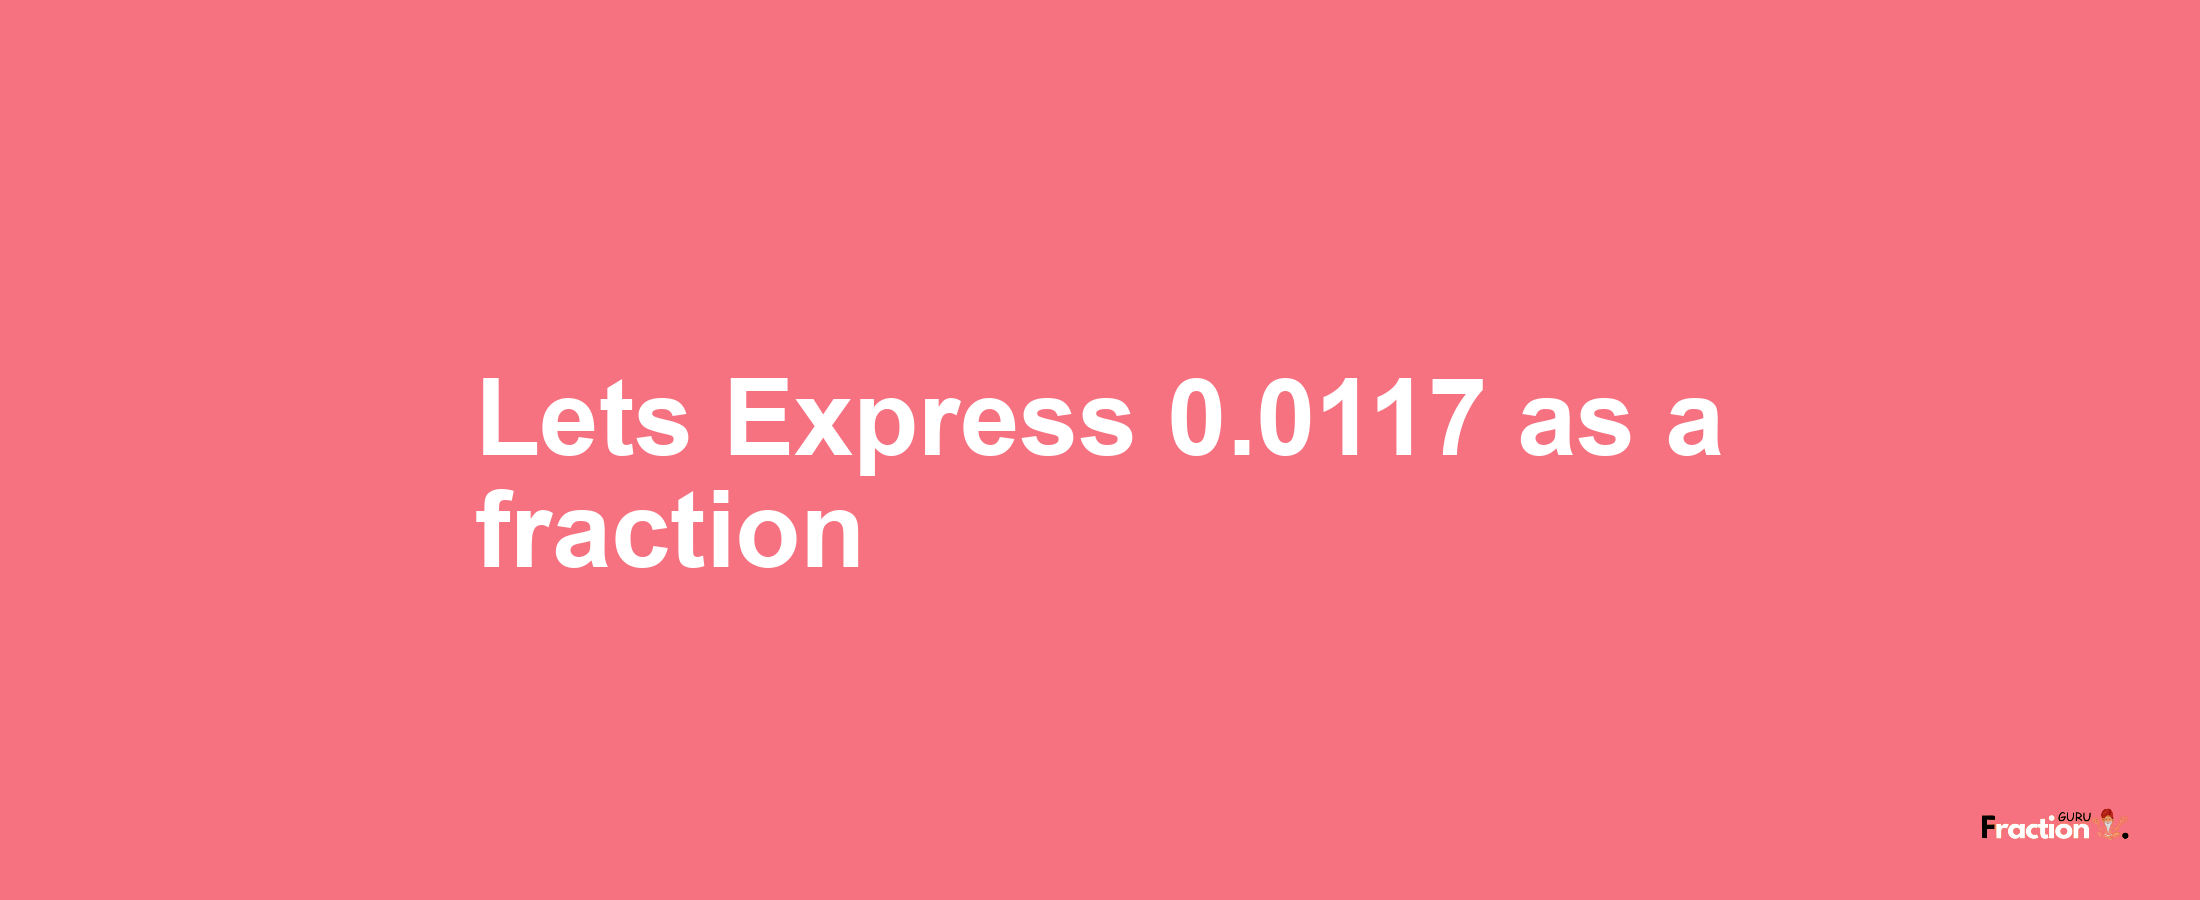 Lets Express 0.0117 as afraction